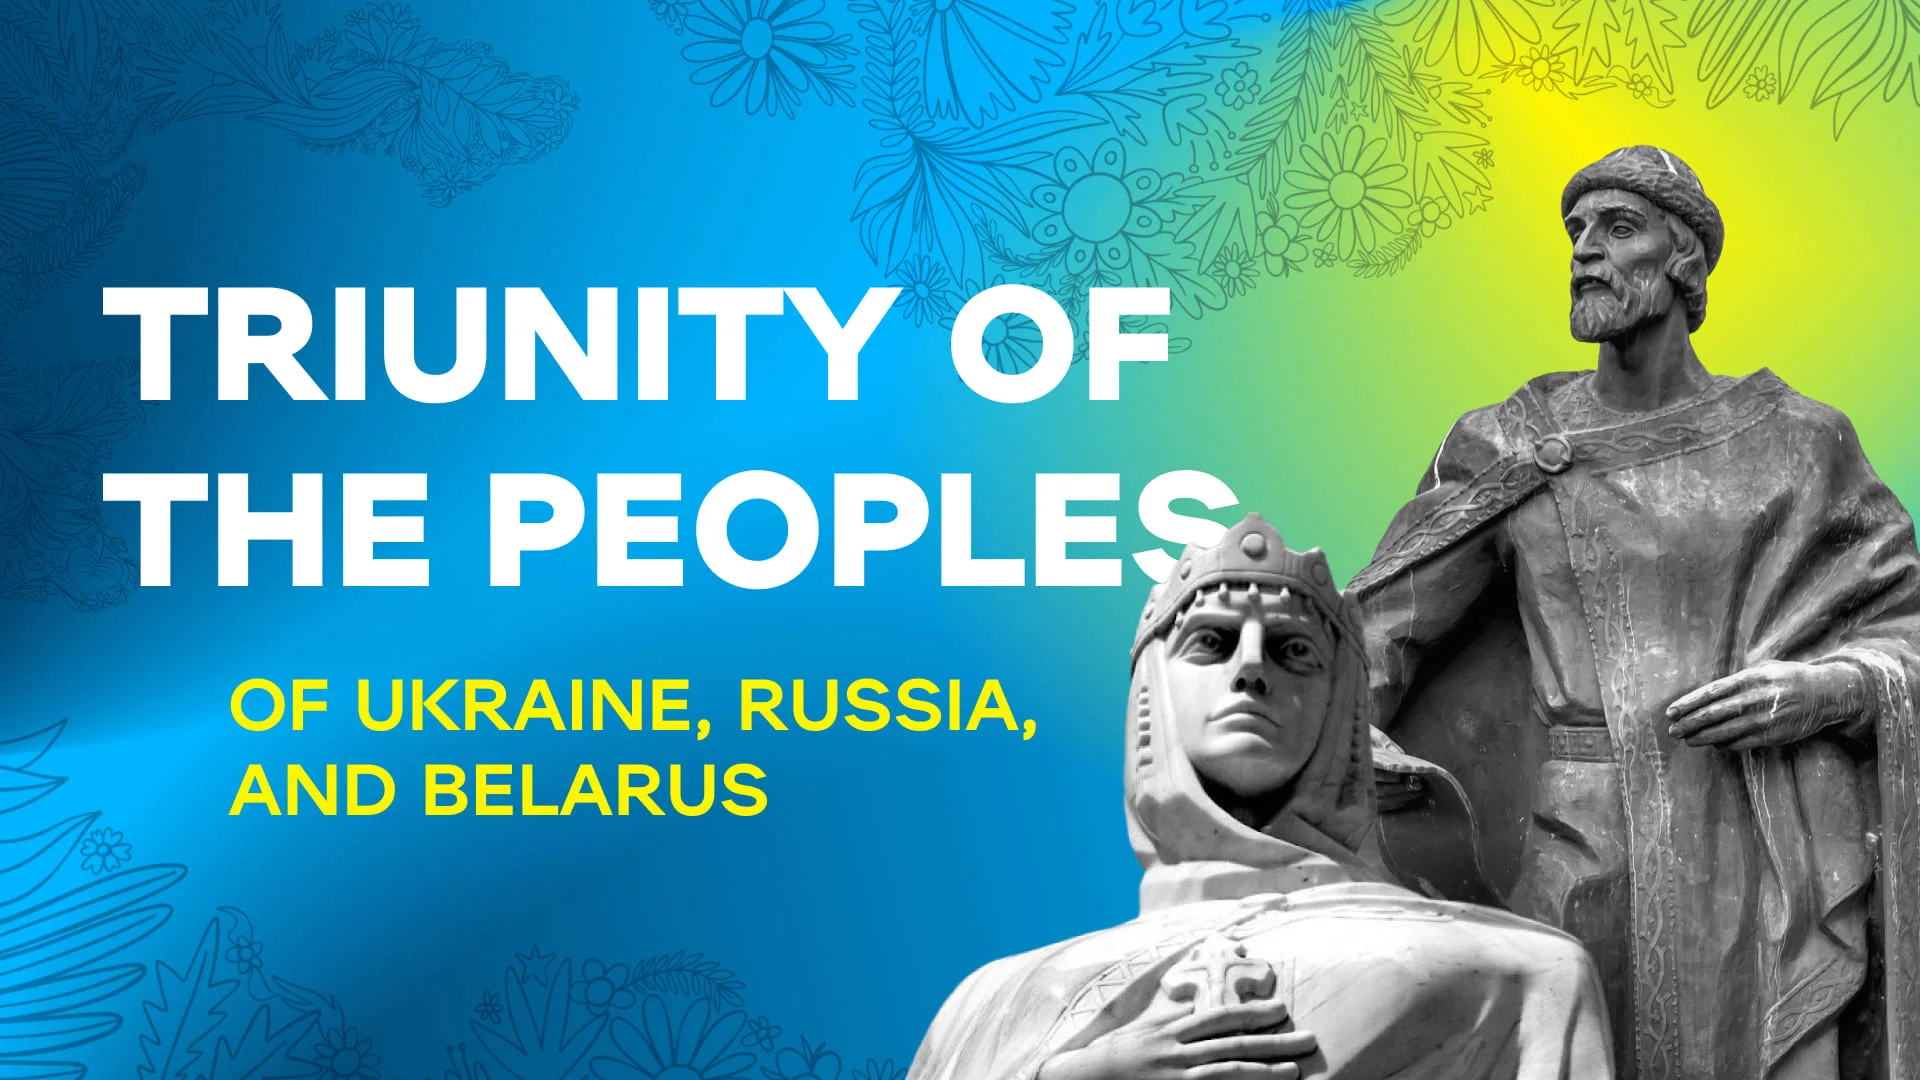 Triunity of the peoples of Ukraine, russia, and belarus. Credit: WePlay Holding